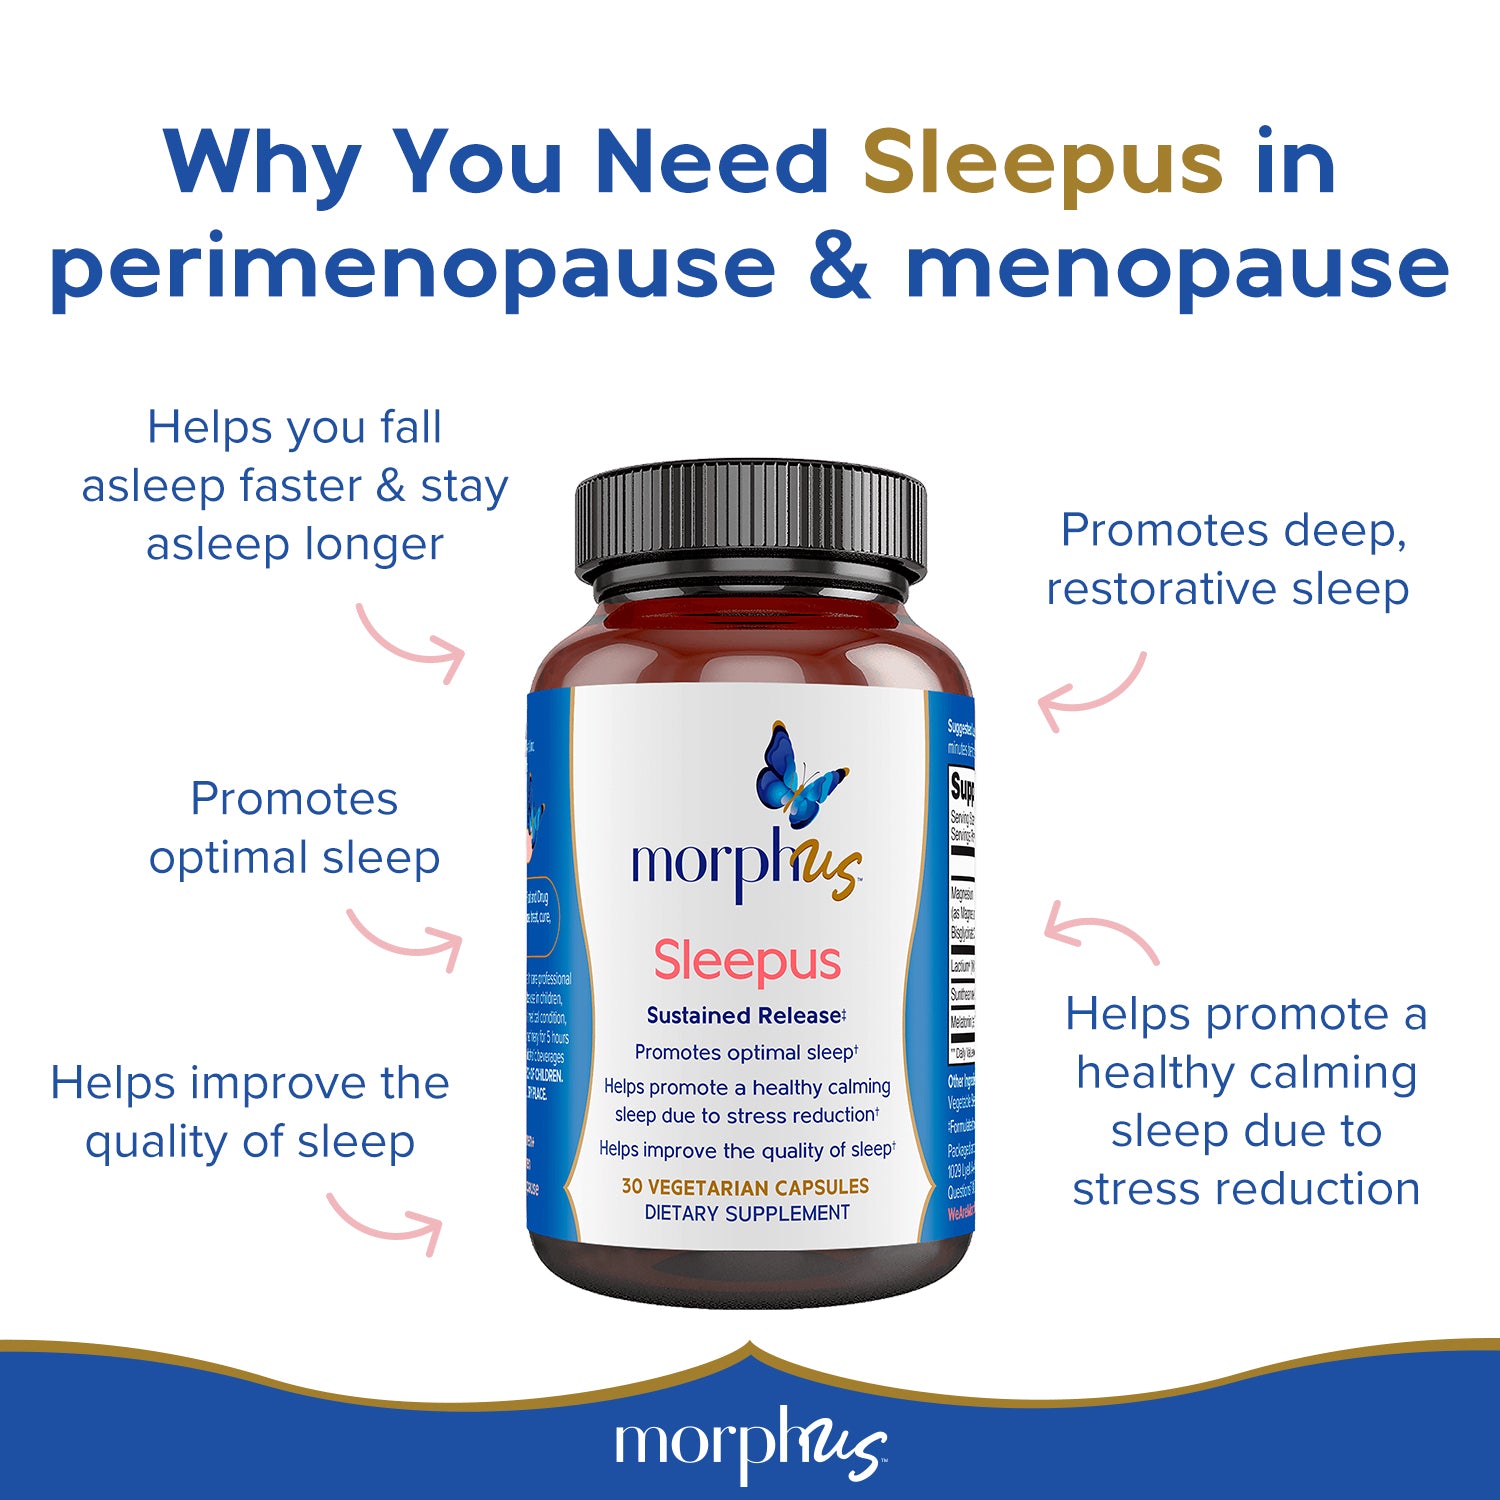 why you need morphus sleepus for better sleep in perimenopause and menopause